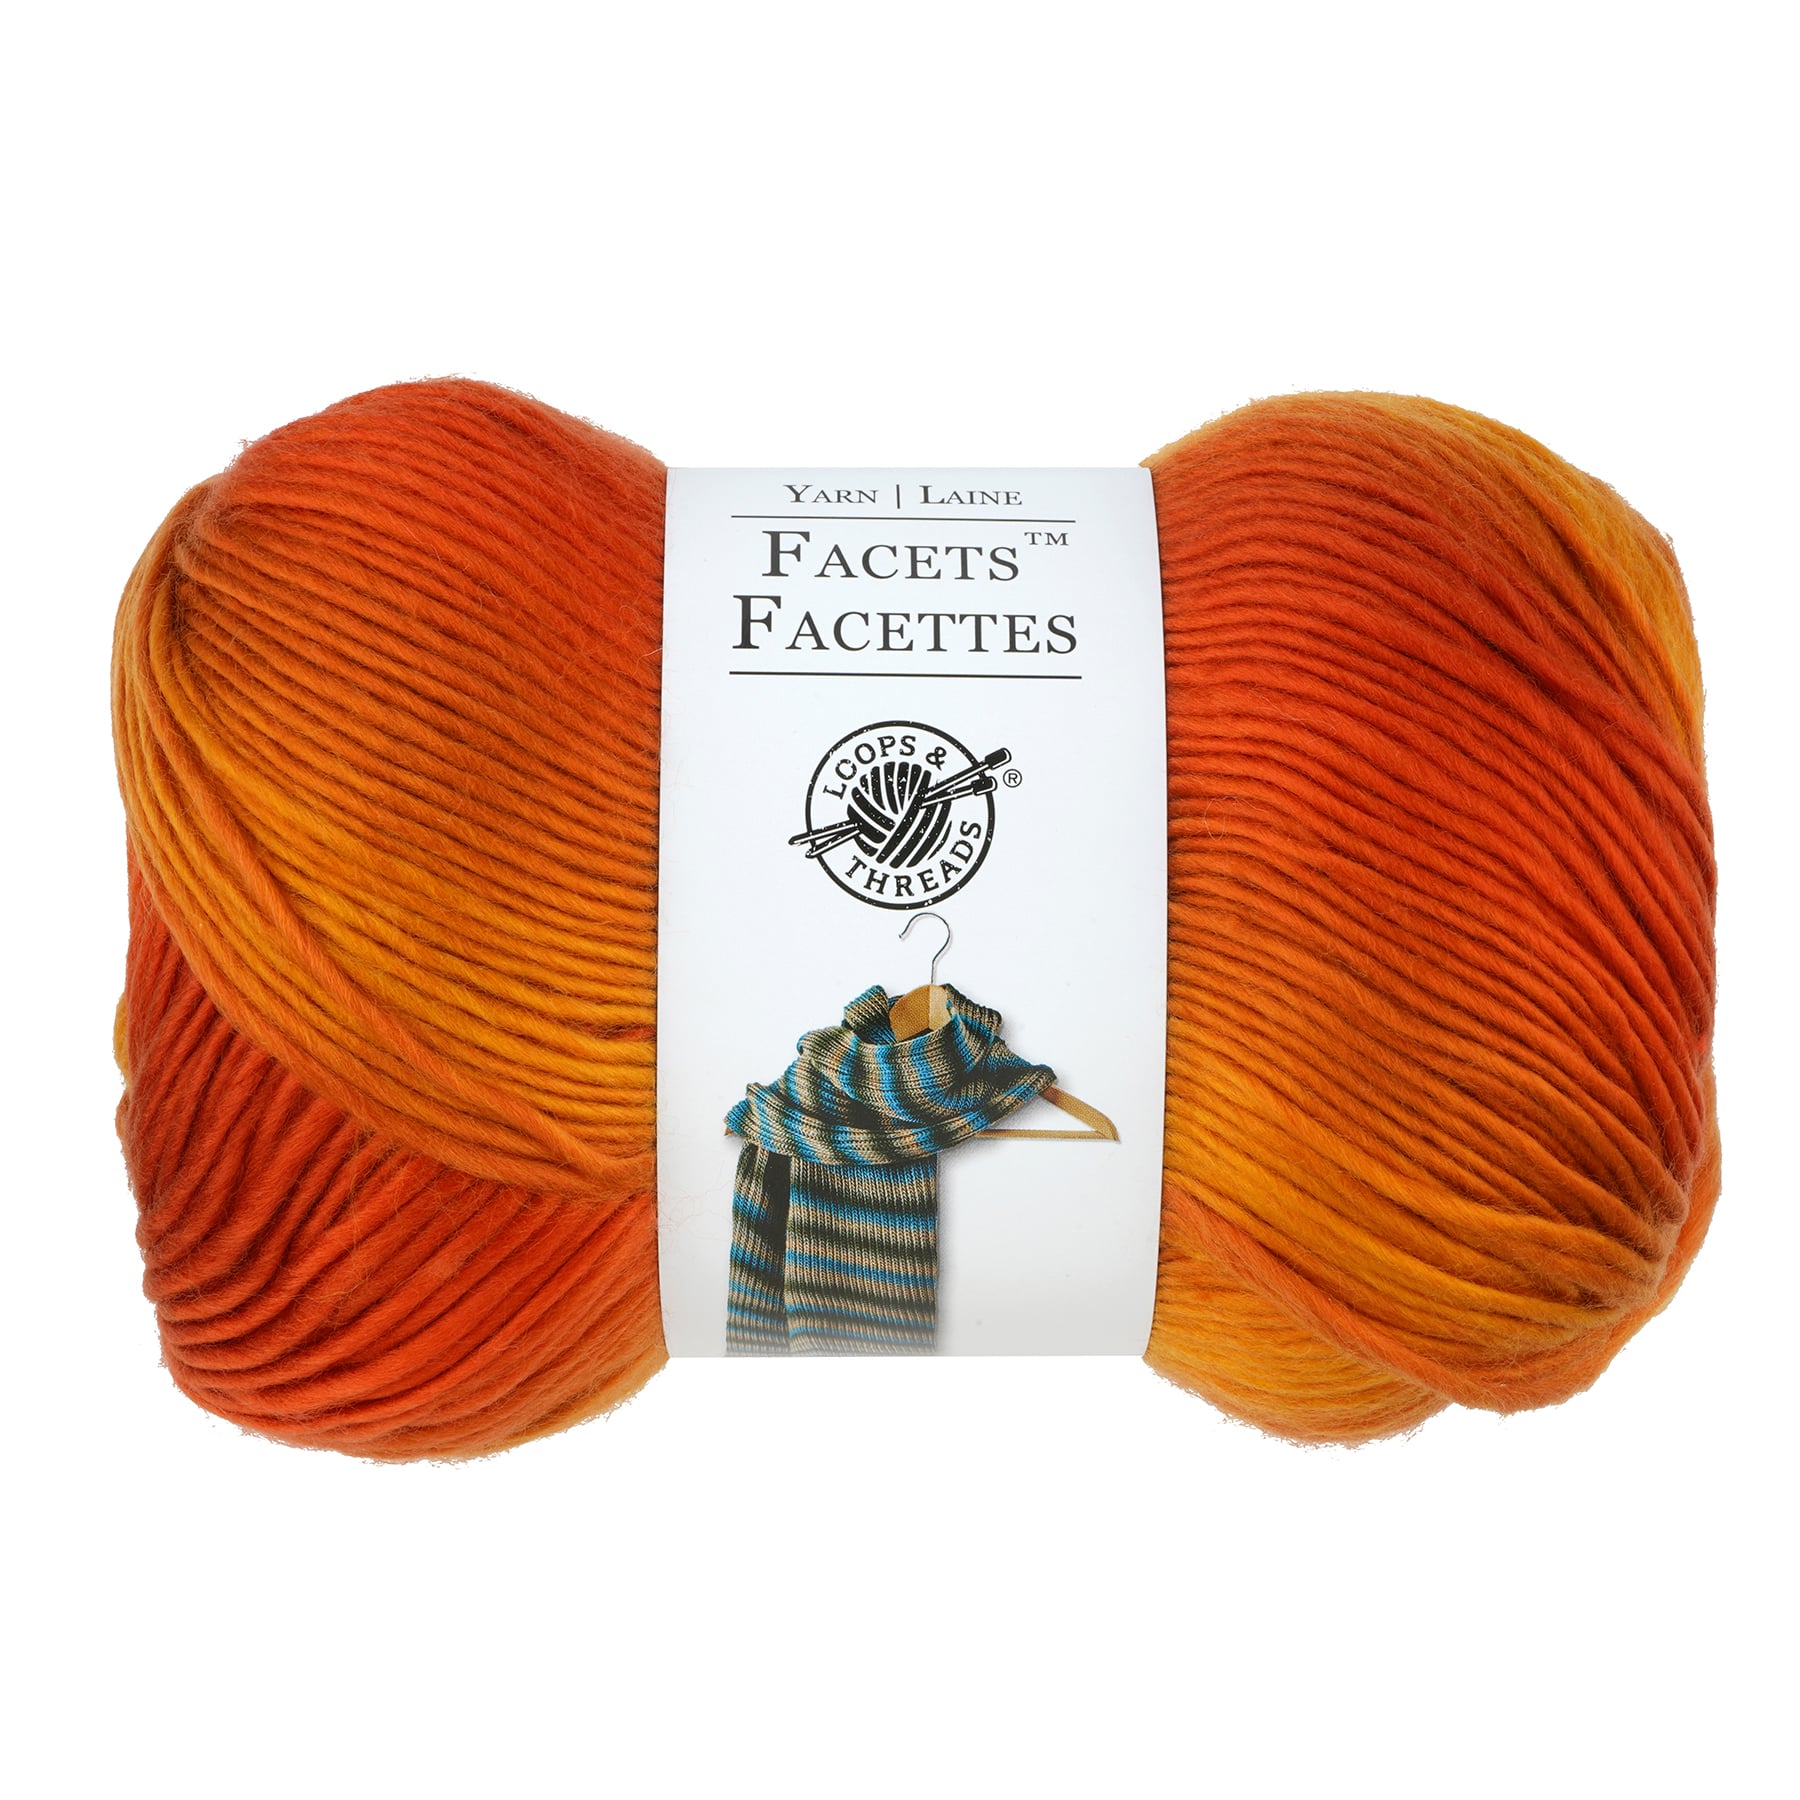 YARN, and perfectly sculpted to your face.